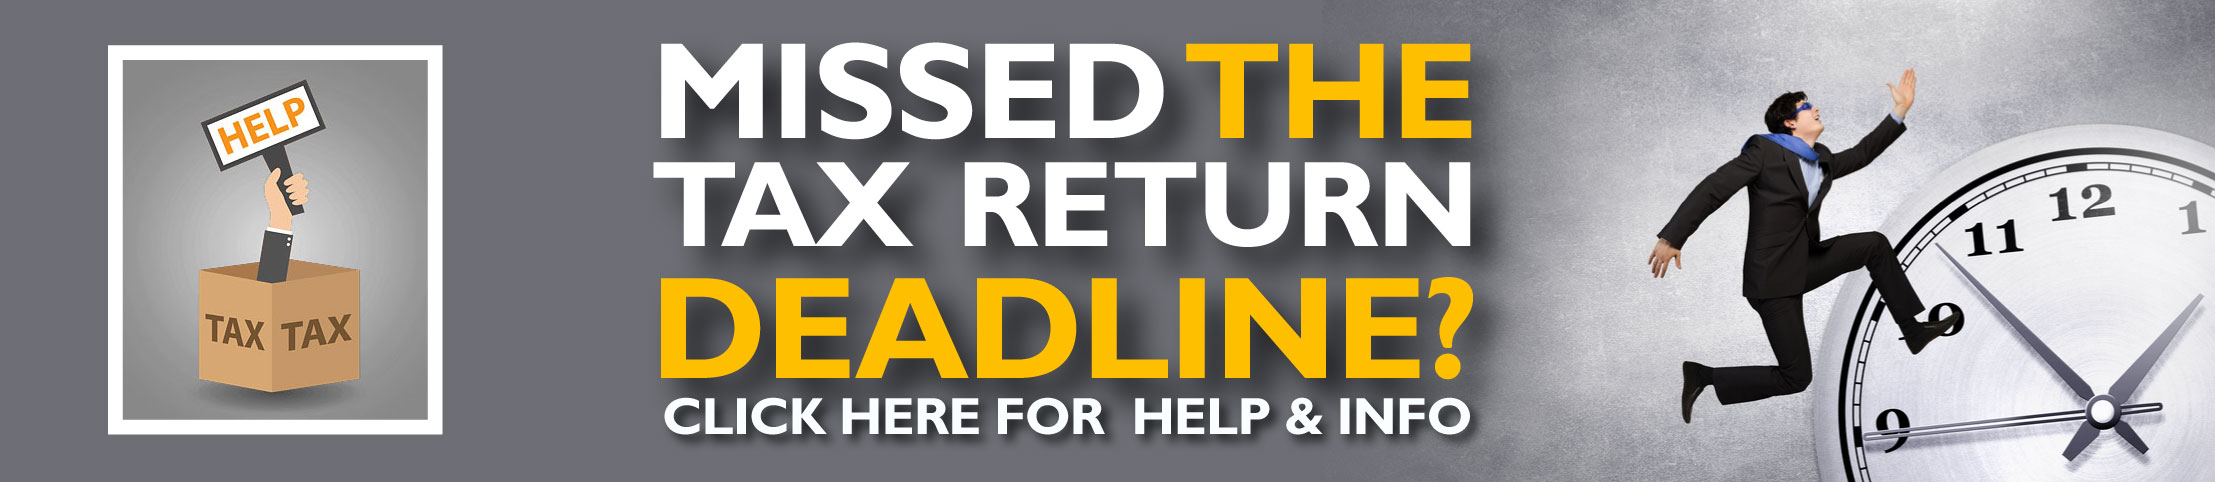 Missed the Self-Assessment tax return deadline? Now what?